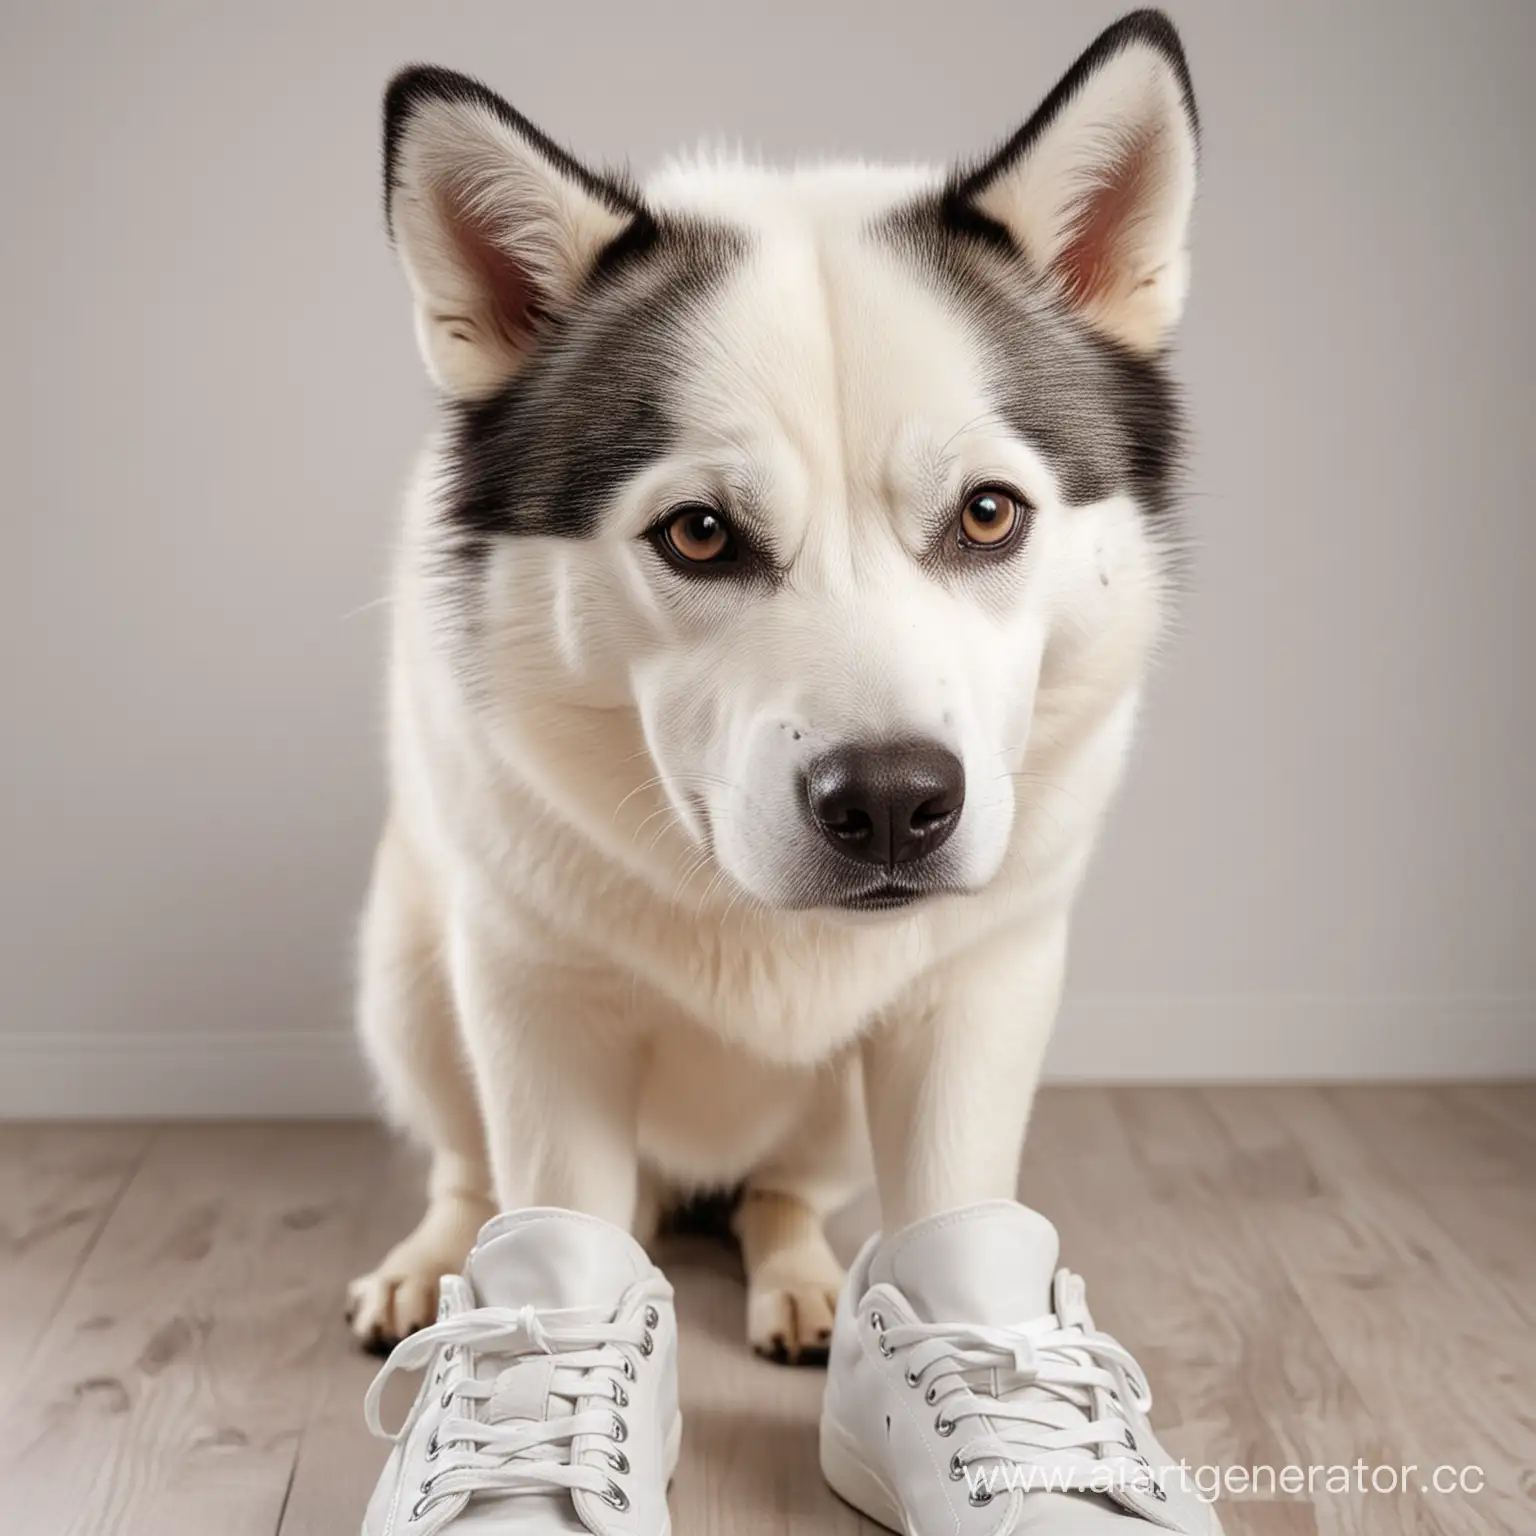 CloseUp-Portrait-of-a-White-HuskyLike-Dog-Licking-Its-Nose-in-Sneakers